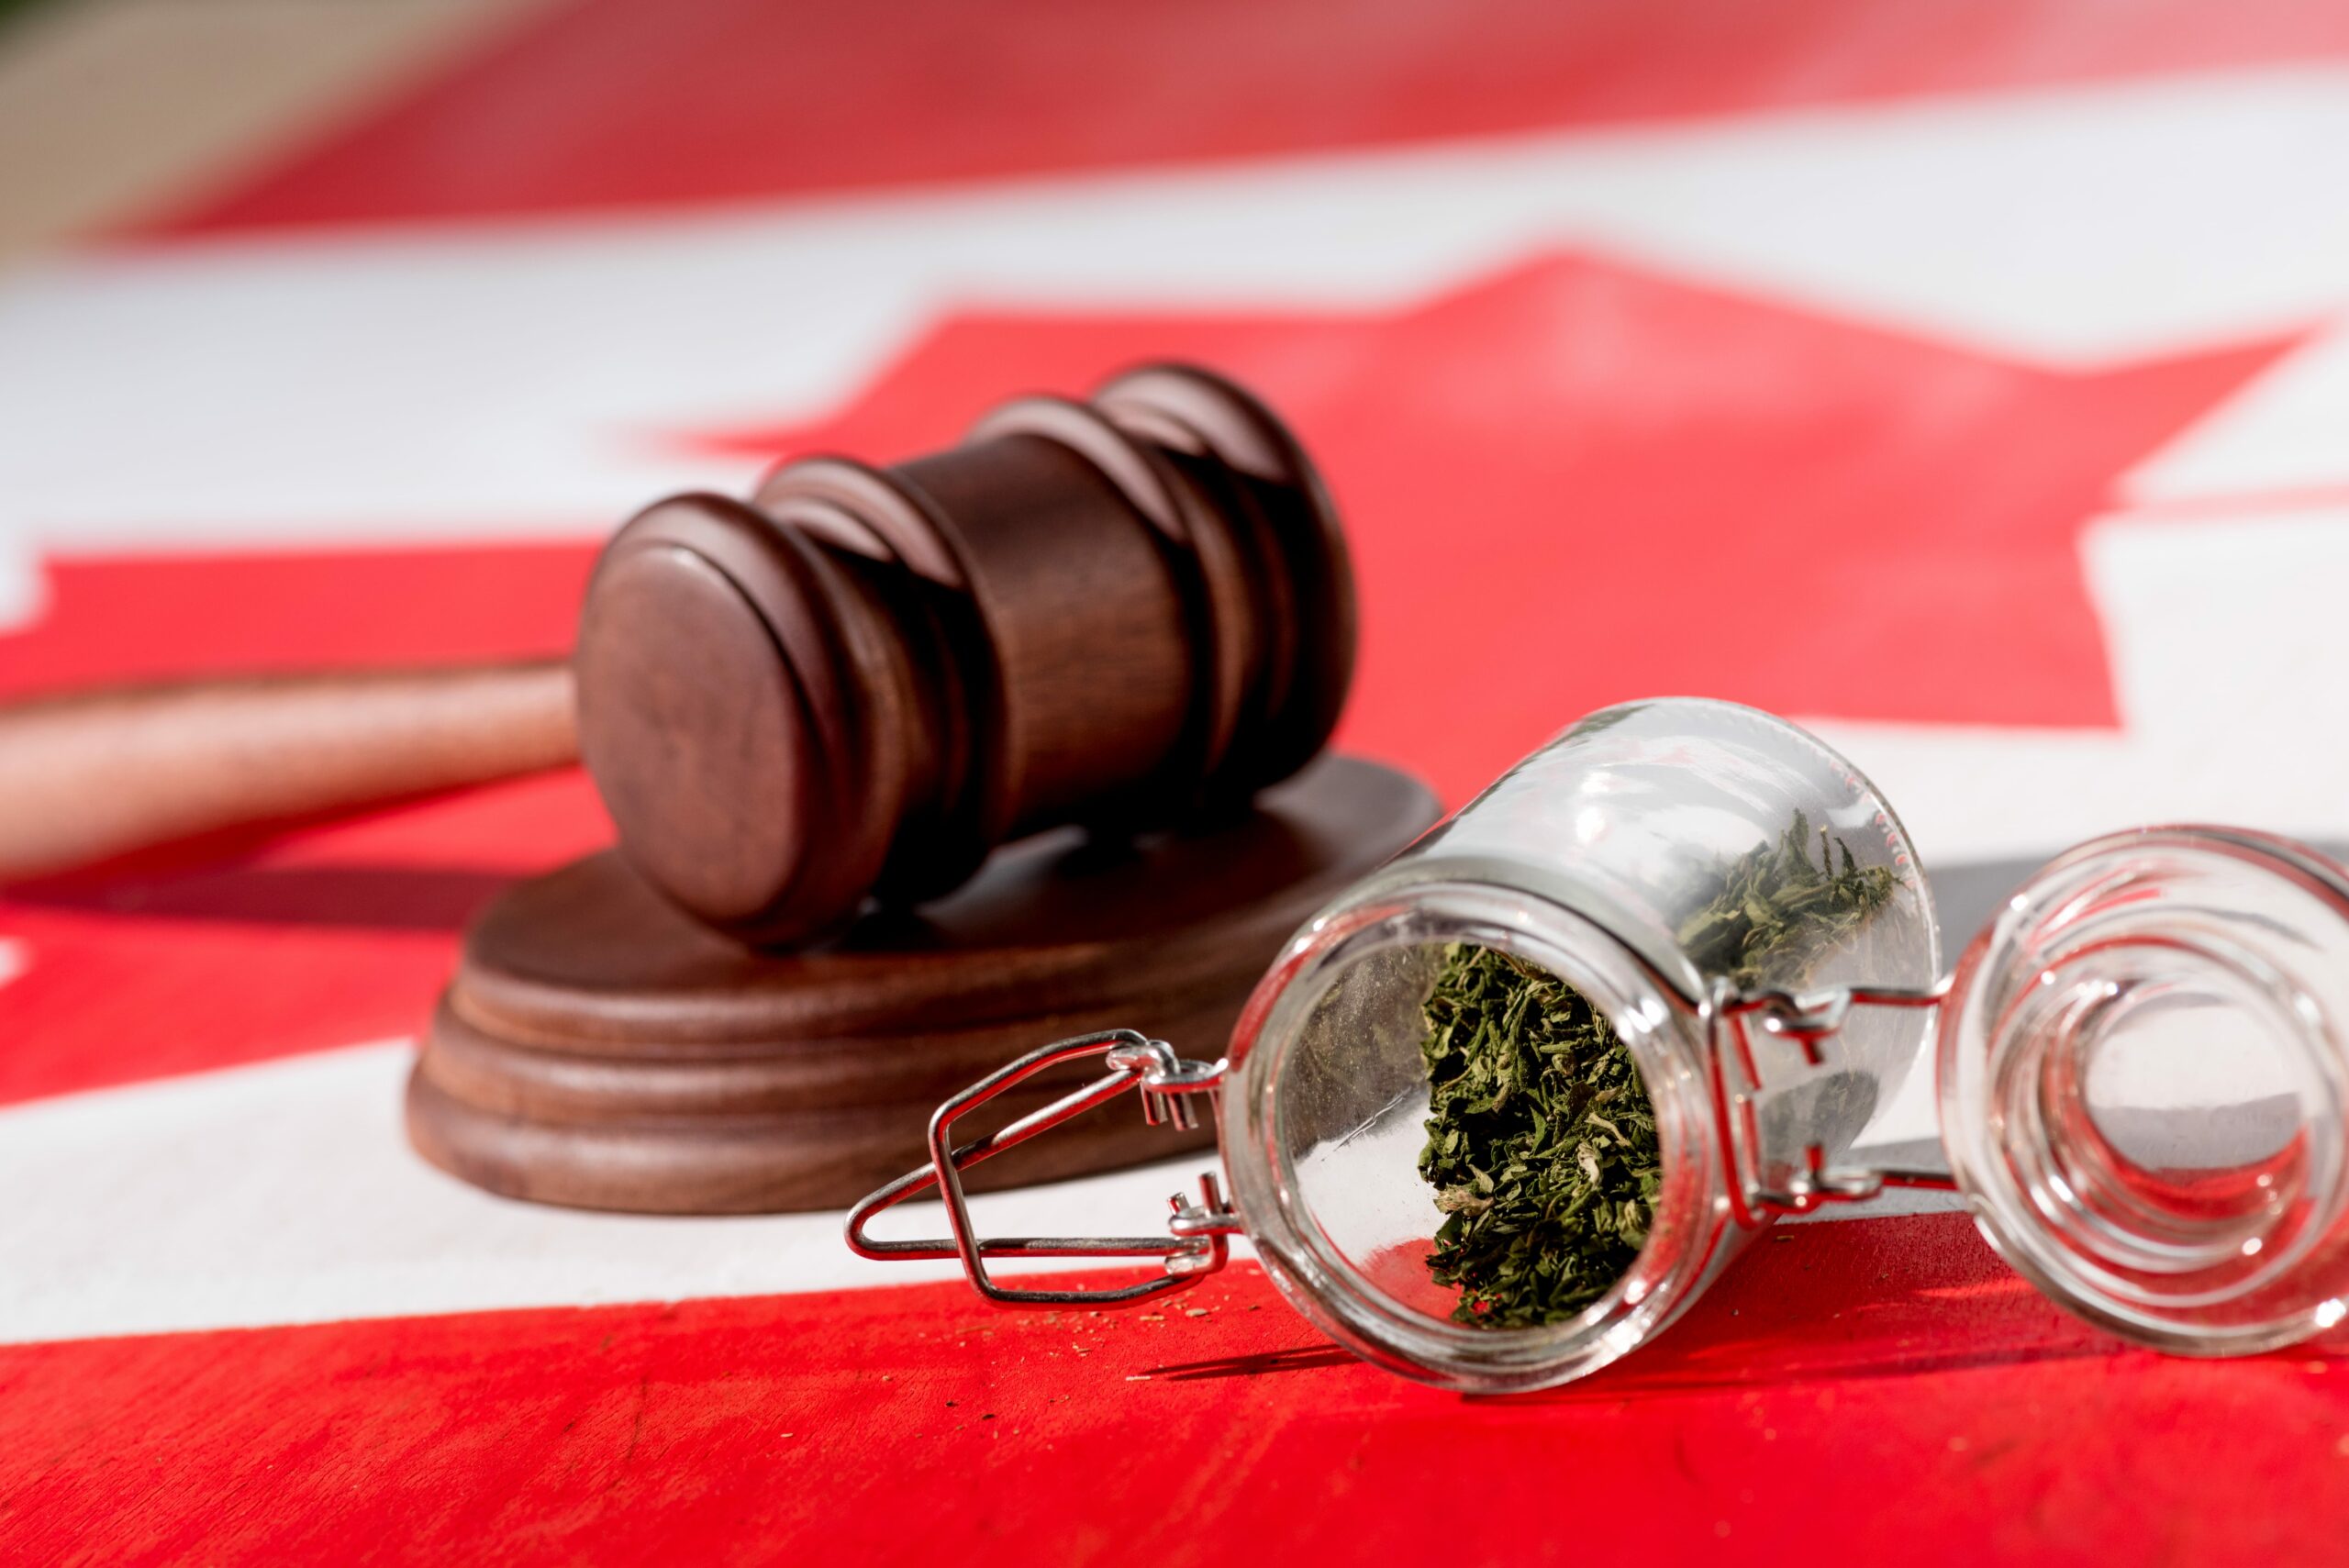 Maryland New Marijuana Laws What You Need to Know